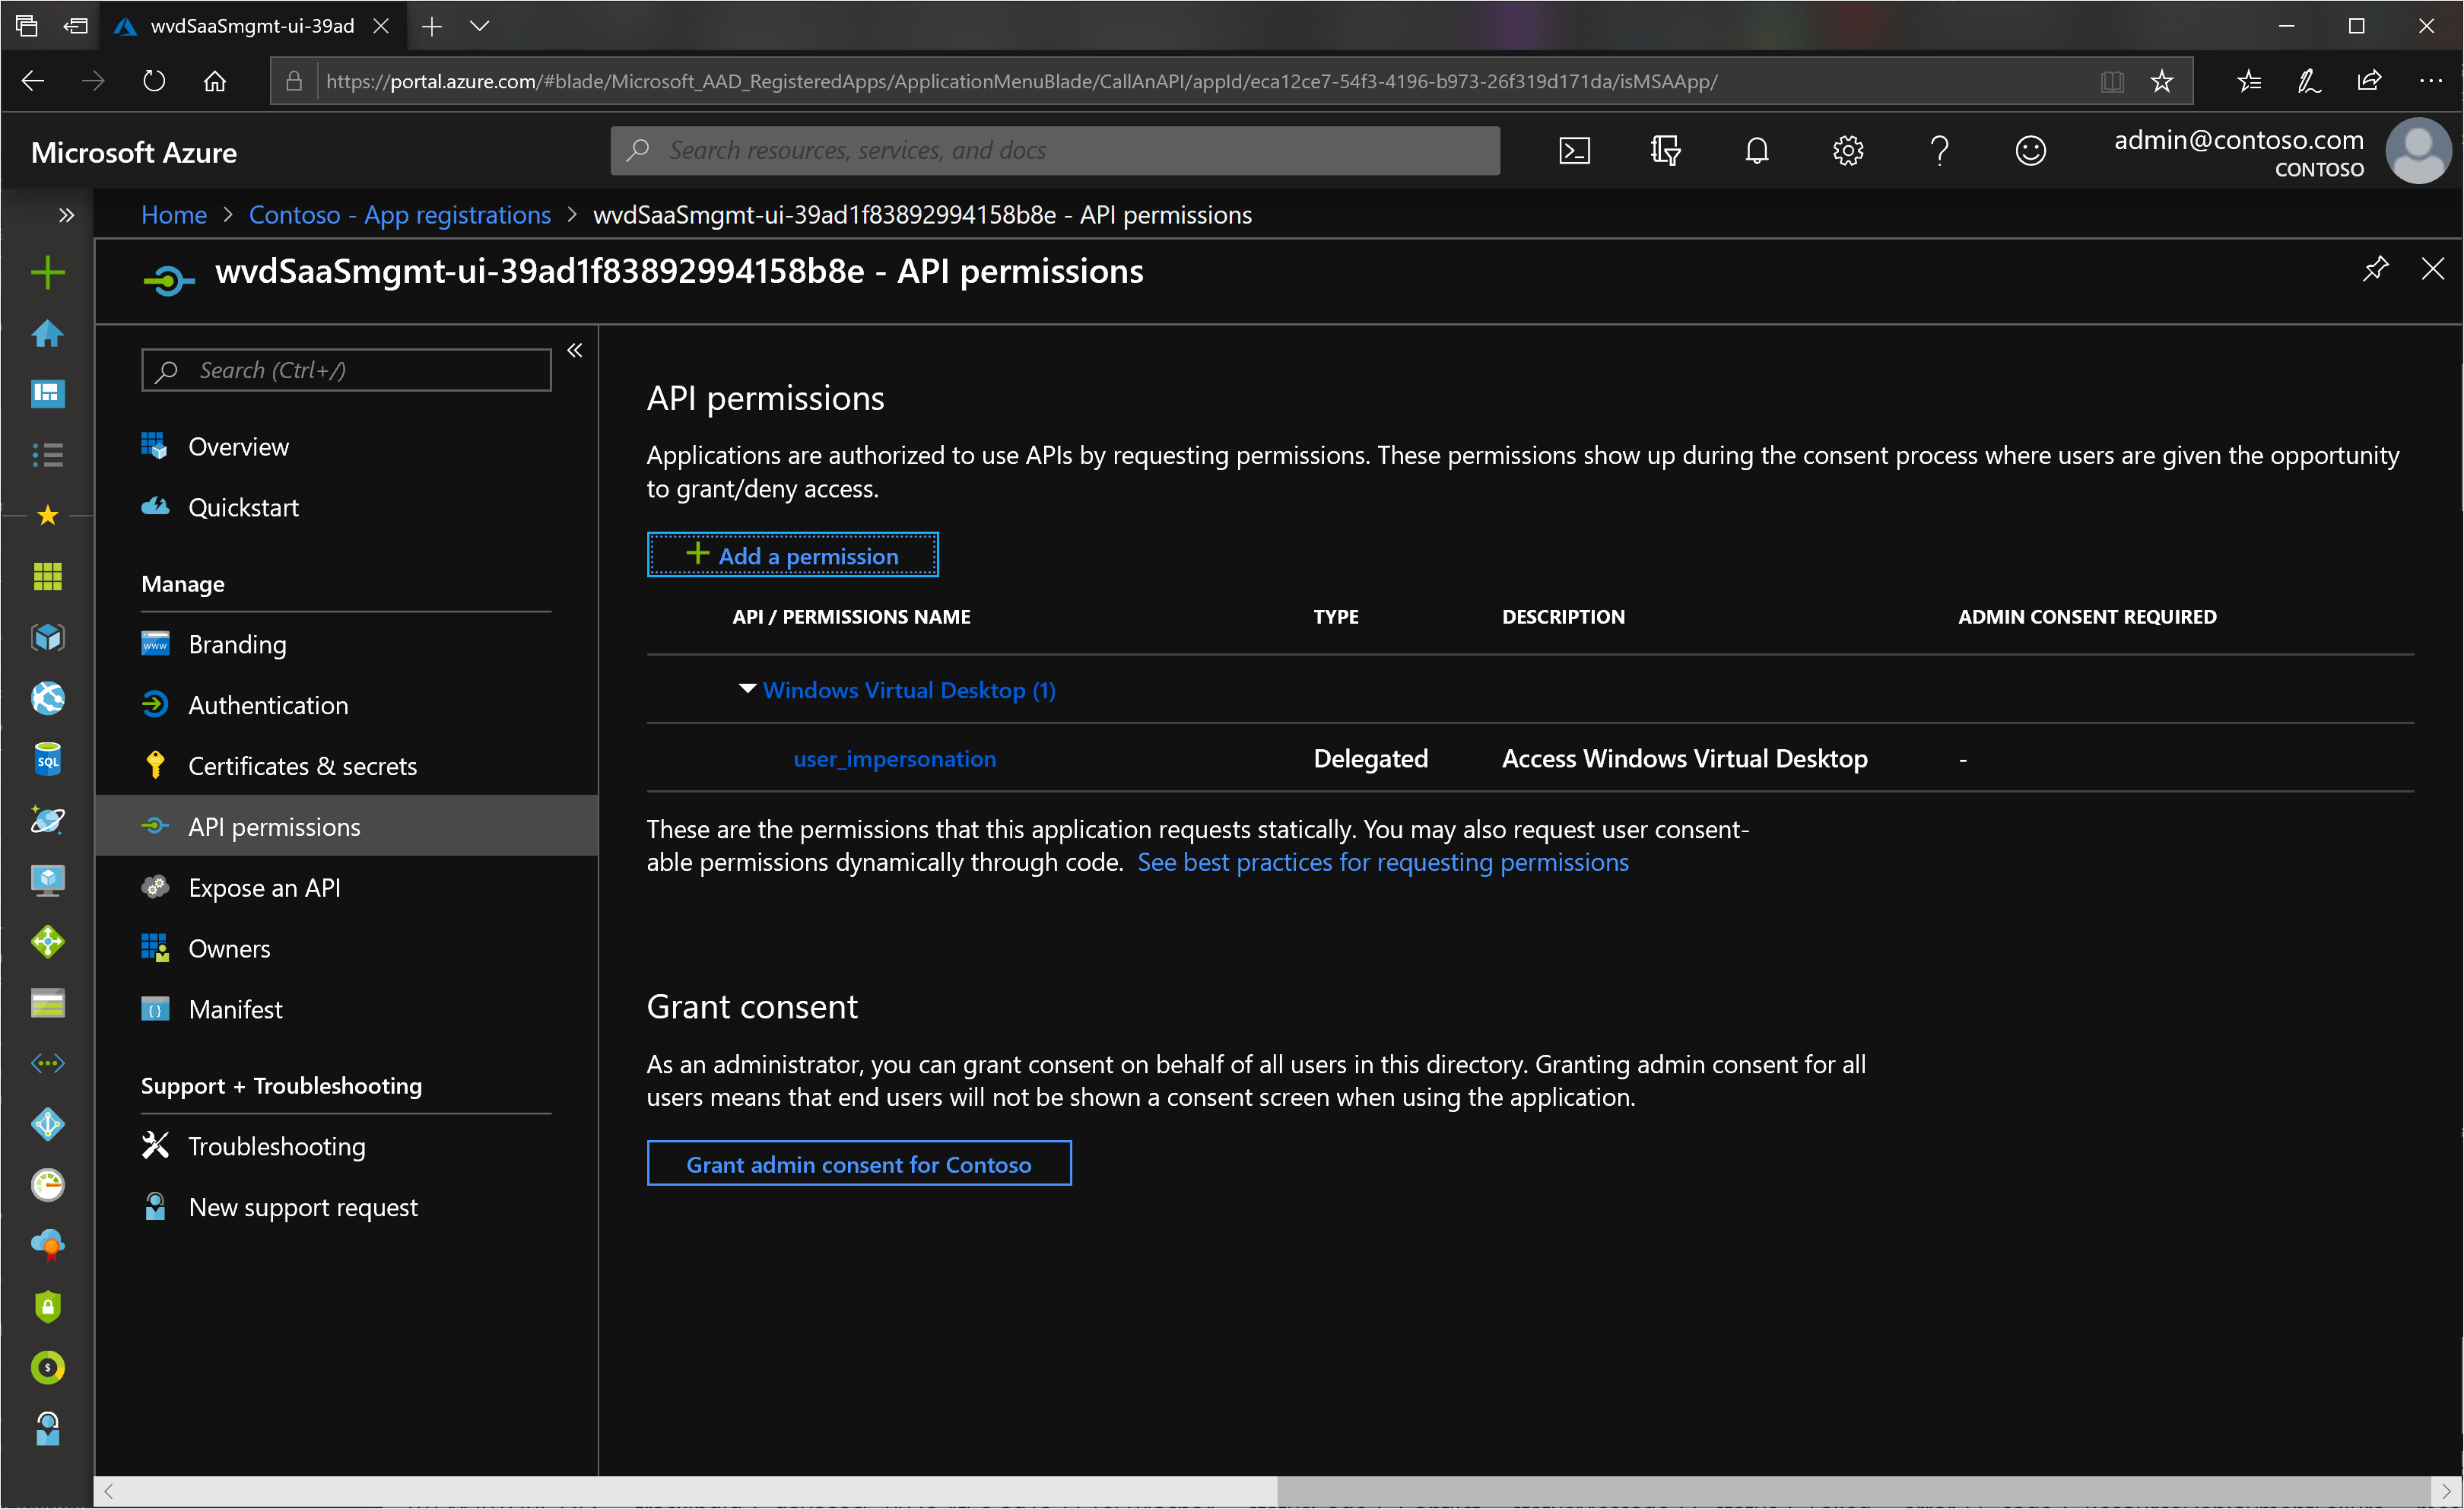 A screenshot showing the permissions being provided when you consent to the UI management tool.